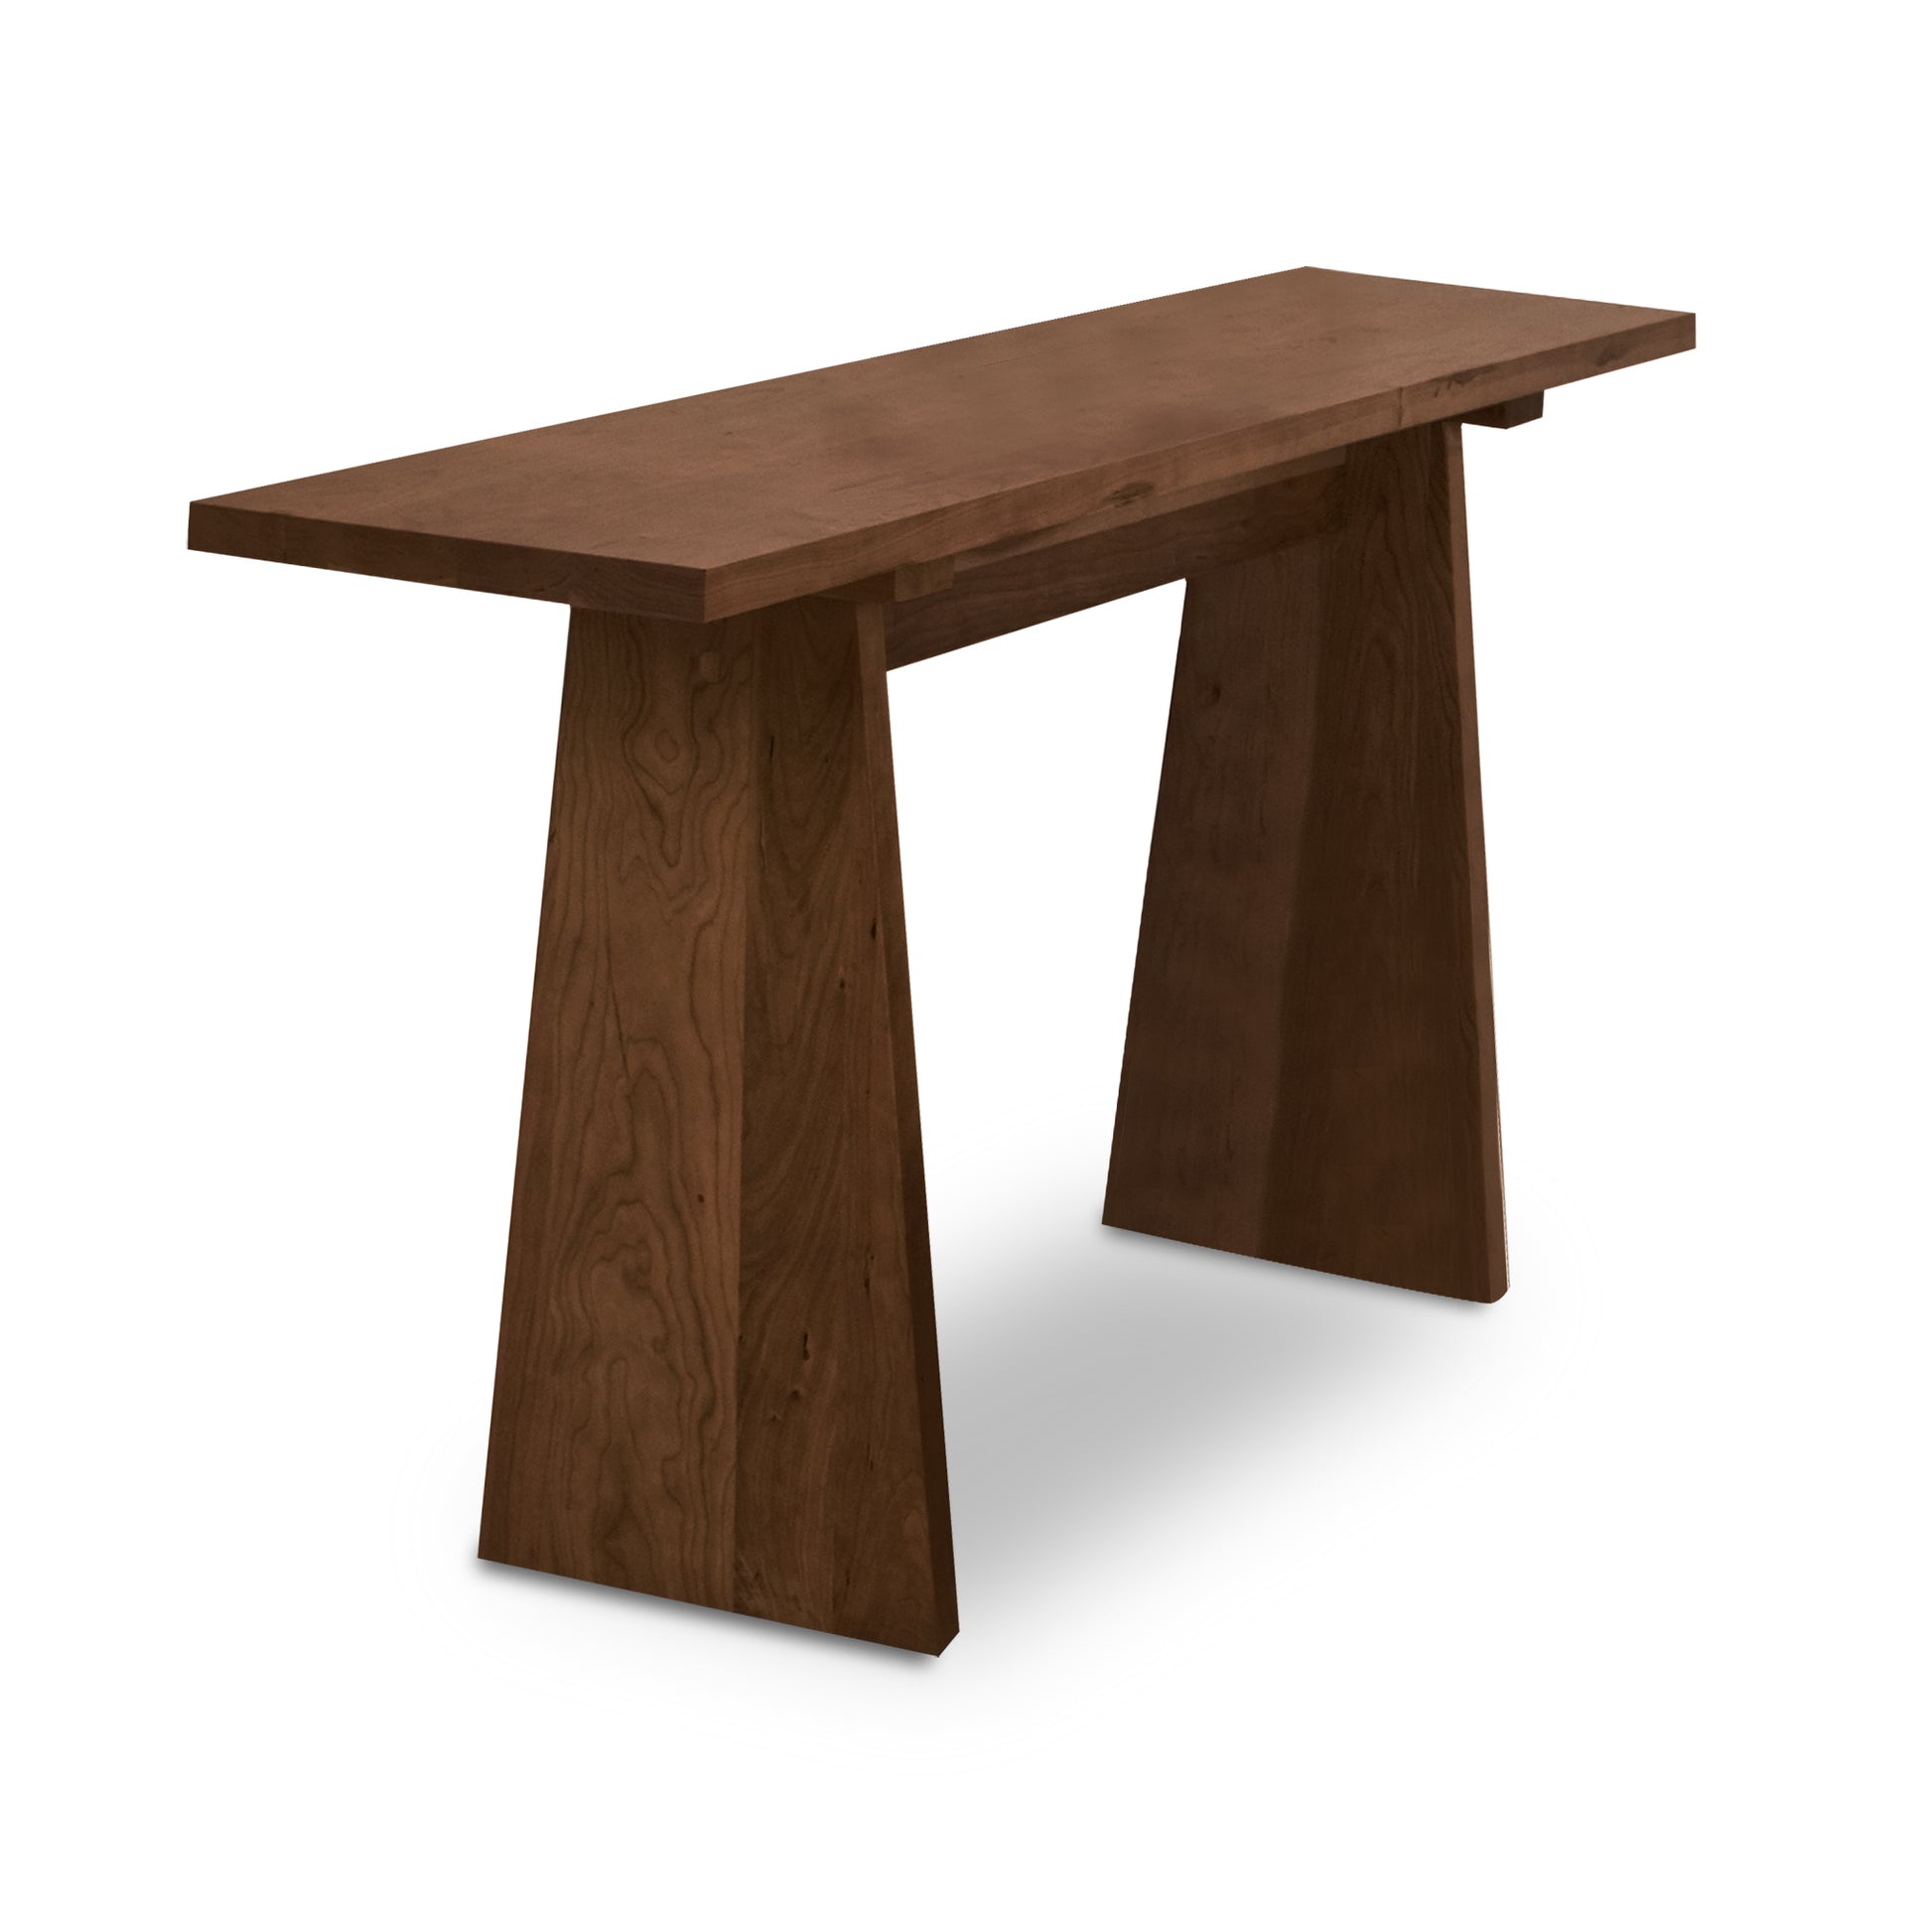 A Modern Designer Sofa Table with a natural finish, sustainably harvested solid woods, and a wooden top by Lyndon Furniture.